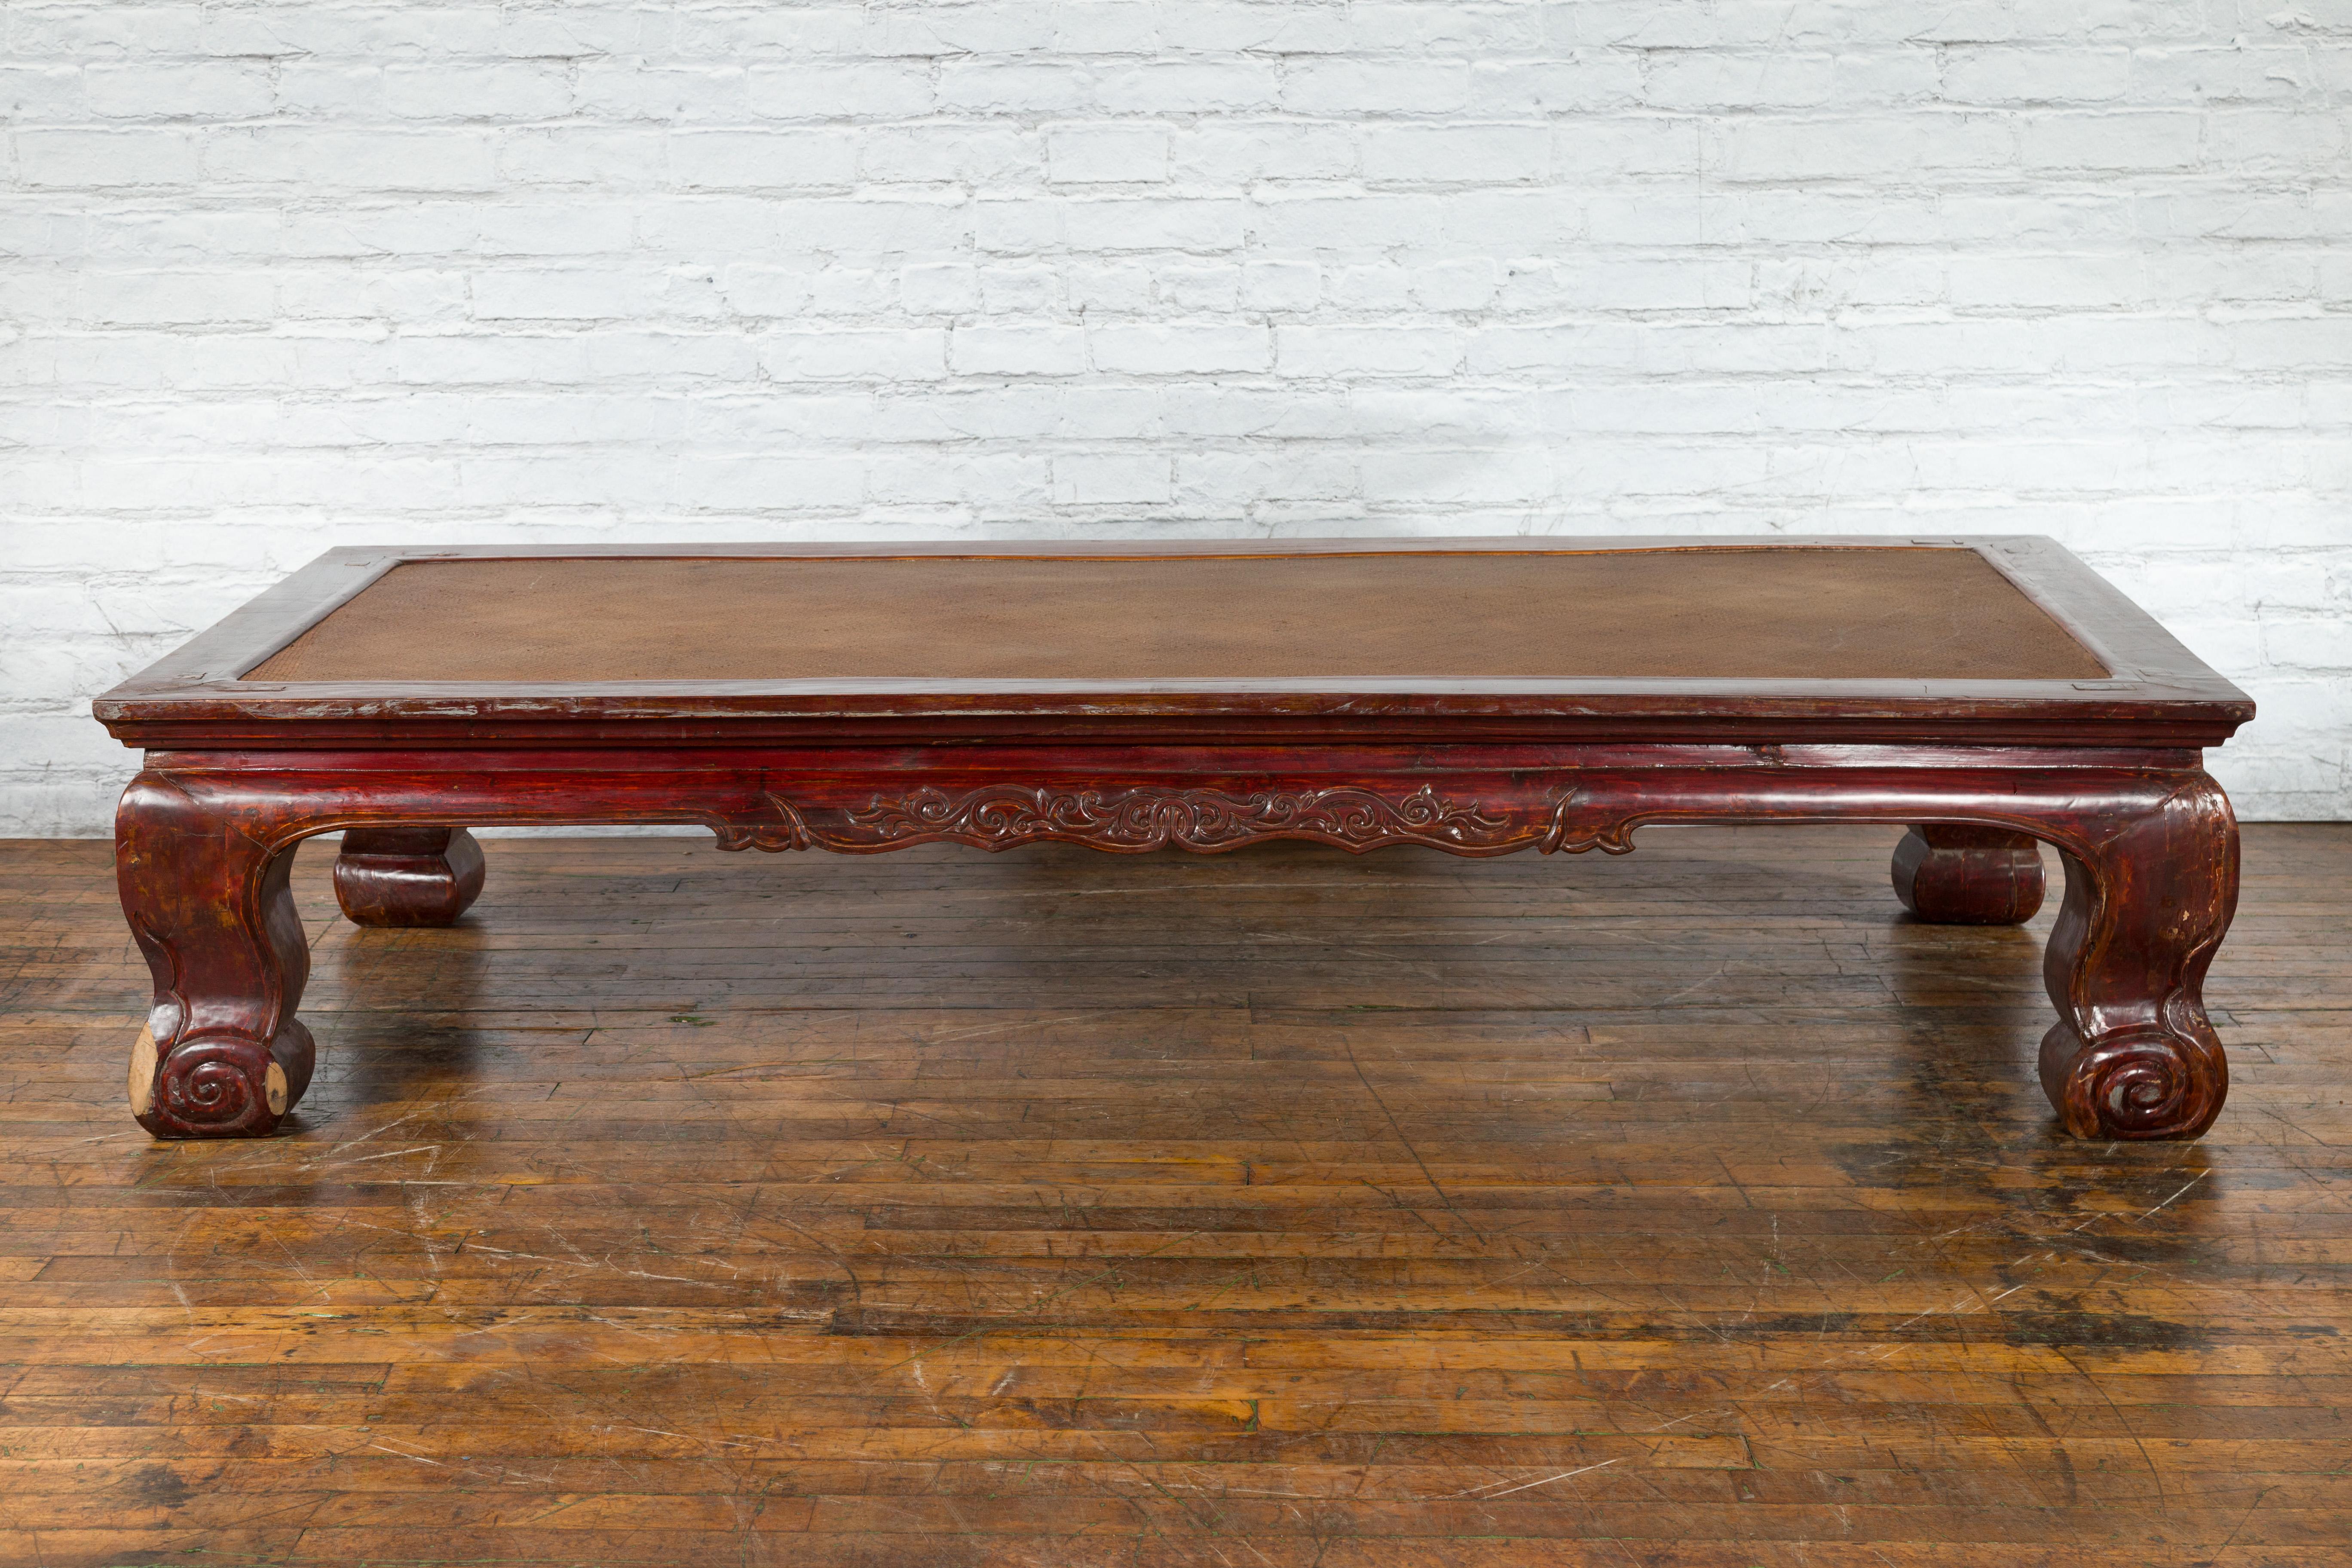 Chinese Qing Dynasty 19th Century Mahogany Stained Coffee Table with Rattan Top For Sale 14